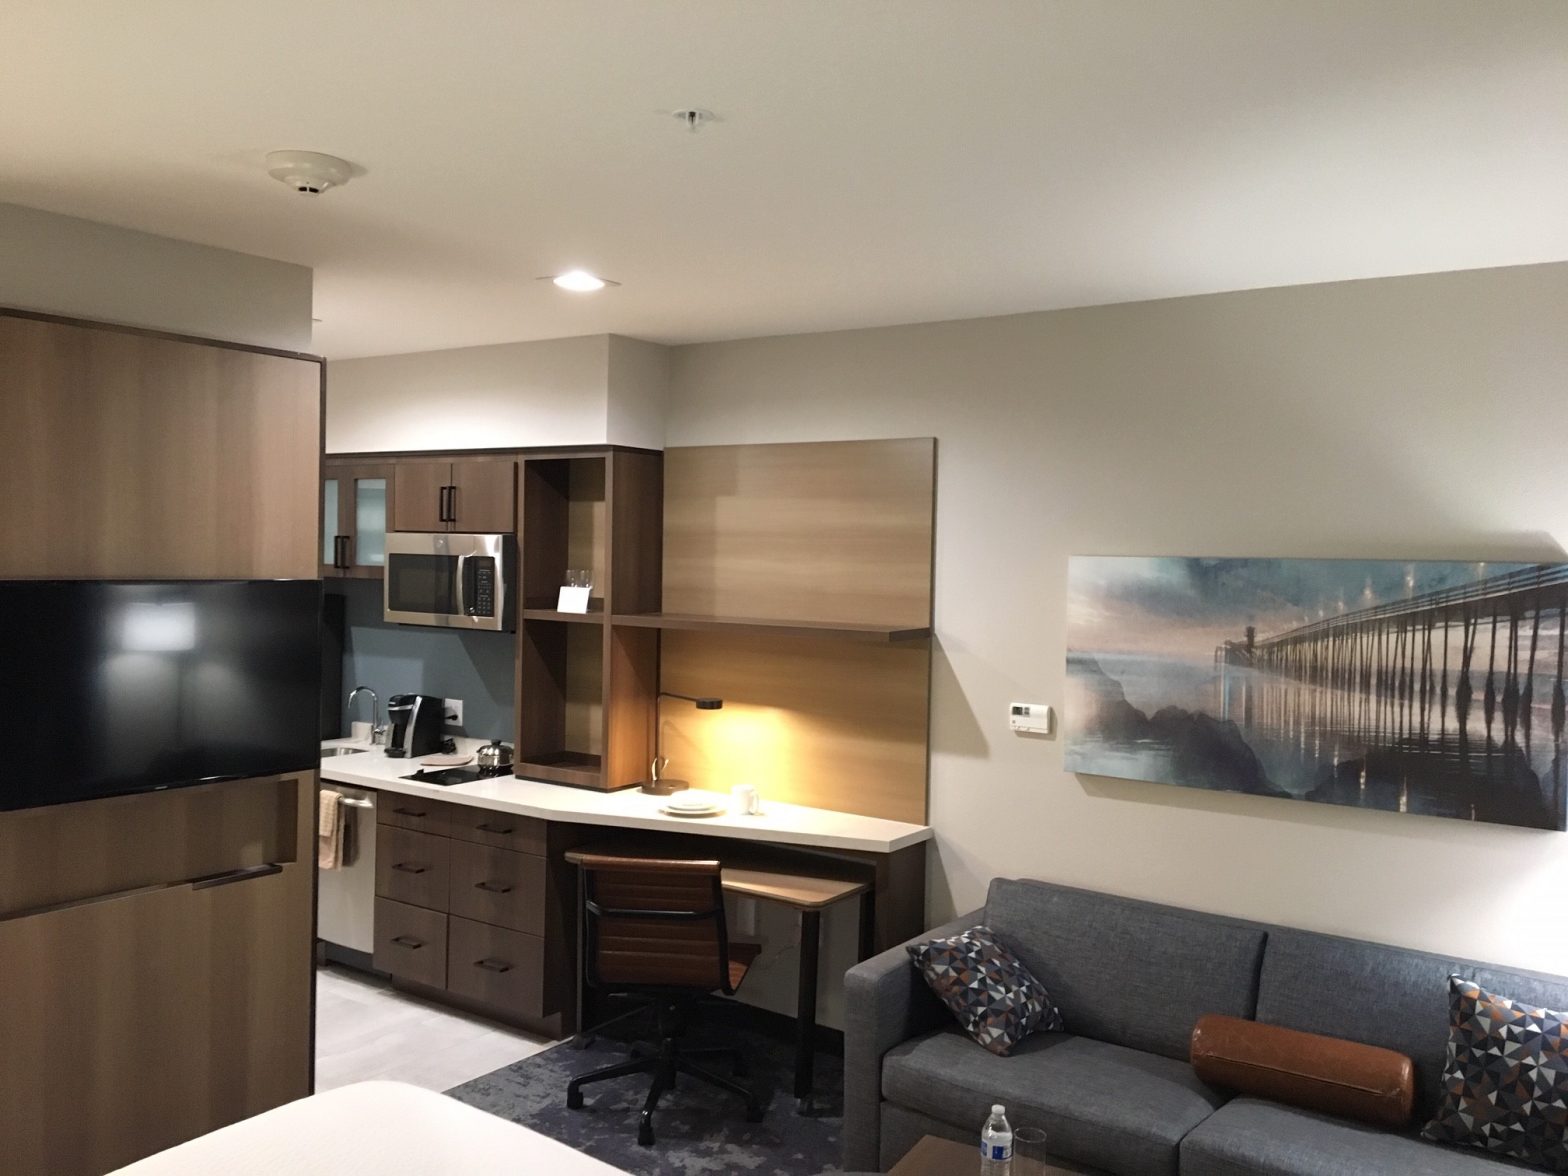 TownePlace Suites by Marriot in San Diego/Kearny Mesa, CA